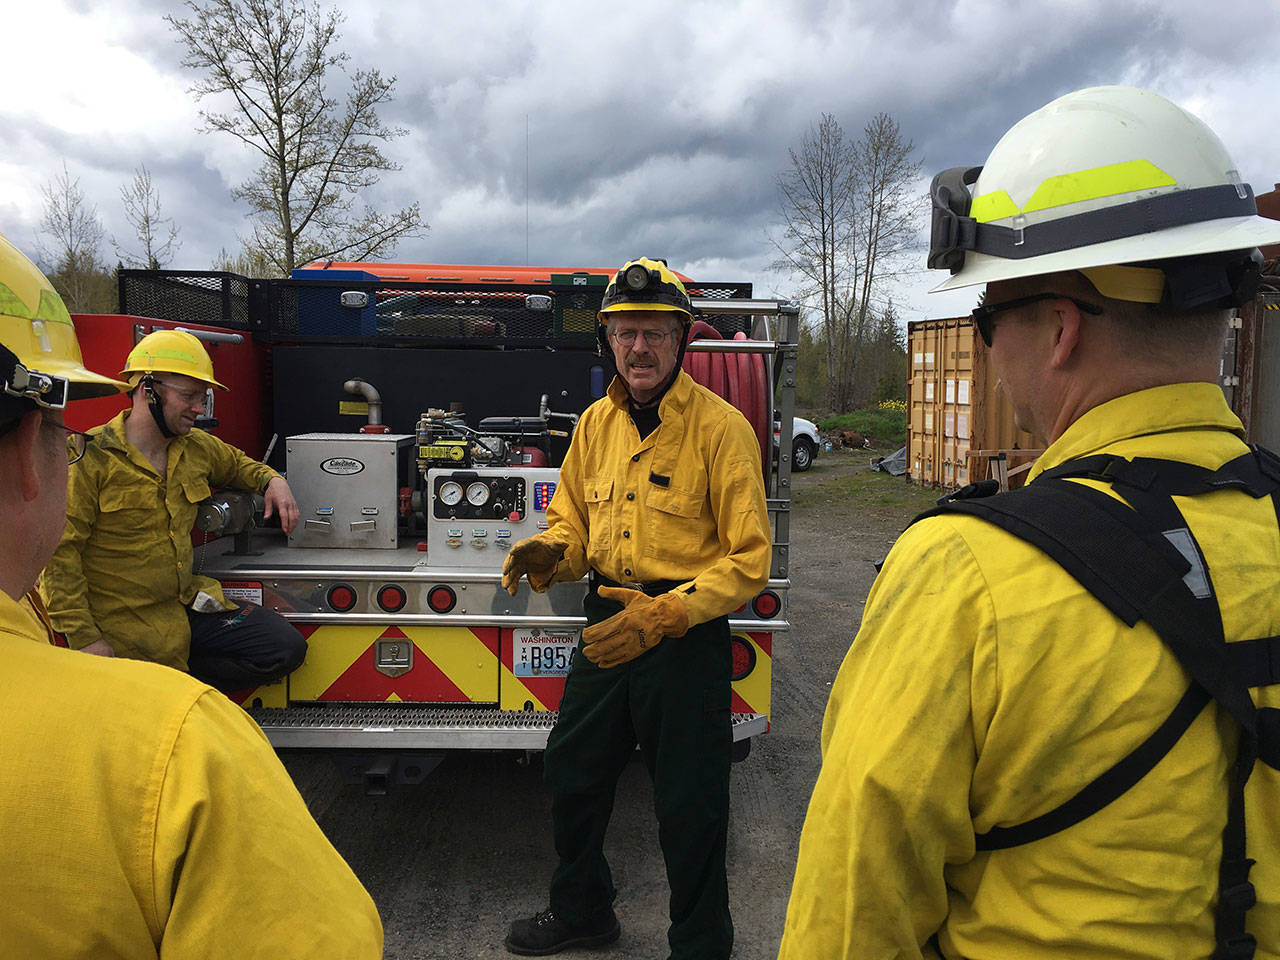 Clallam County Fire District No. 2 Lt. Al Oman, facing the crews, explains the safe operation of pumps on a new brush engine as firefighters look on. (Clallam County Fire District No. 2)